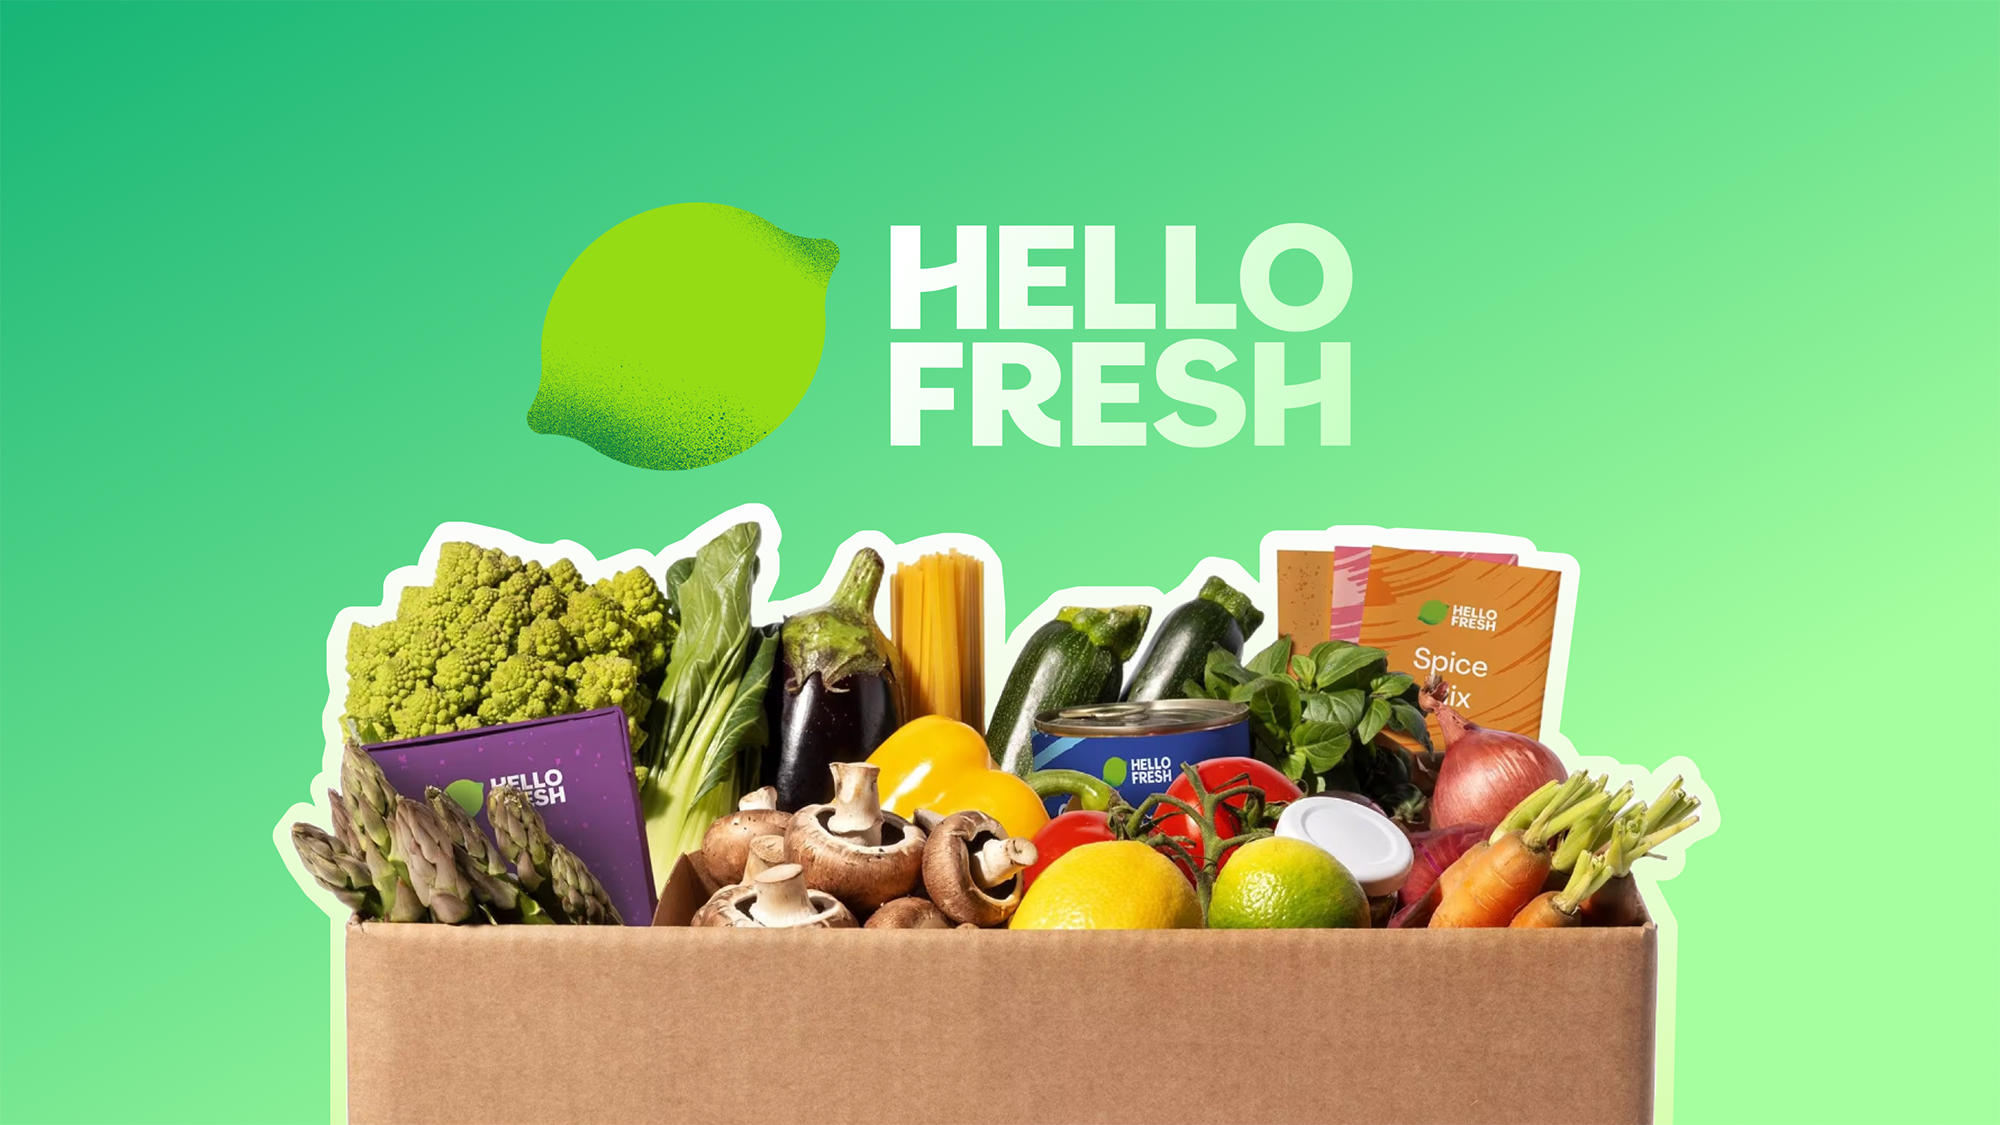 HelloFresh: Competitive Analysis and Future Outlook for Meal Kits